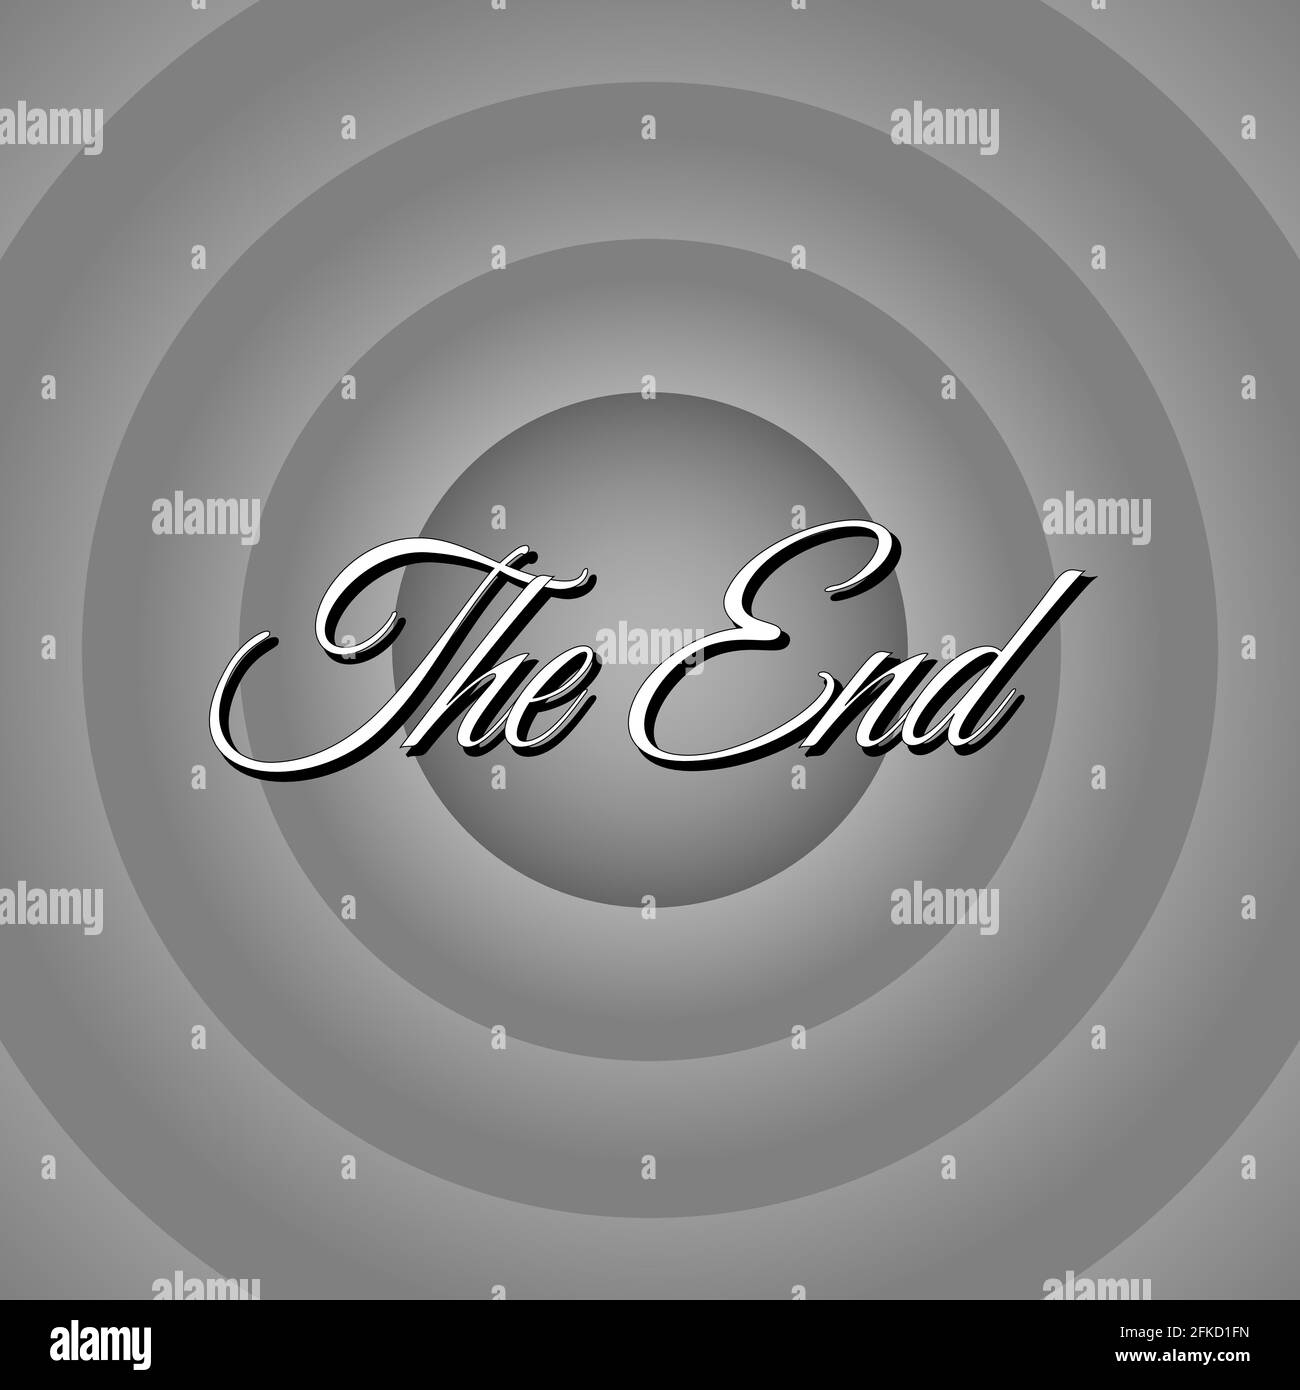 Old movie ending screen with black and white gradient circles Template for your design Stock Vector